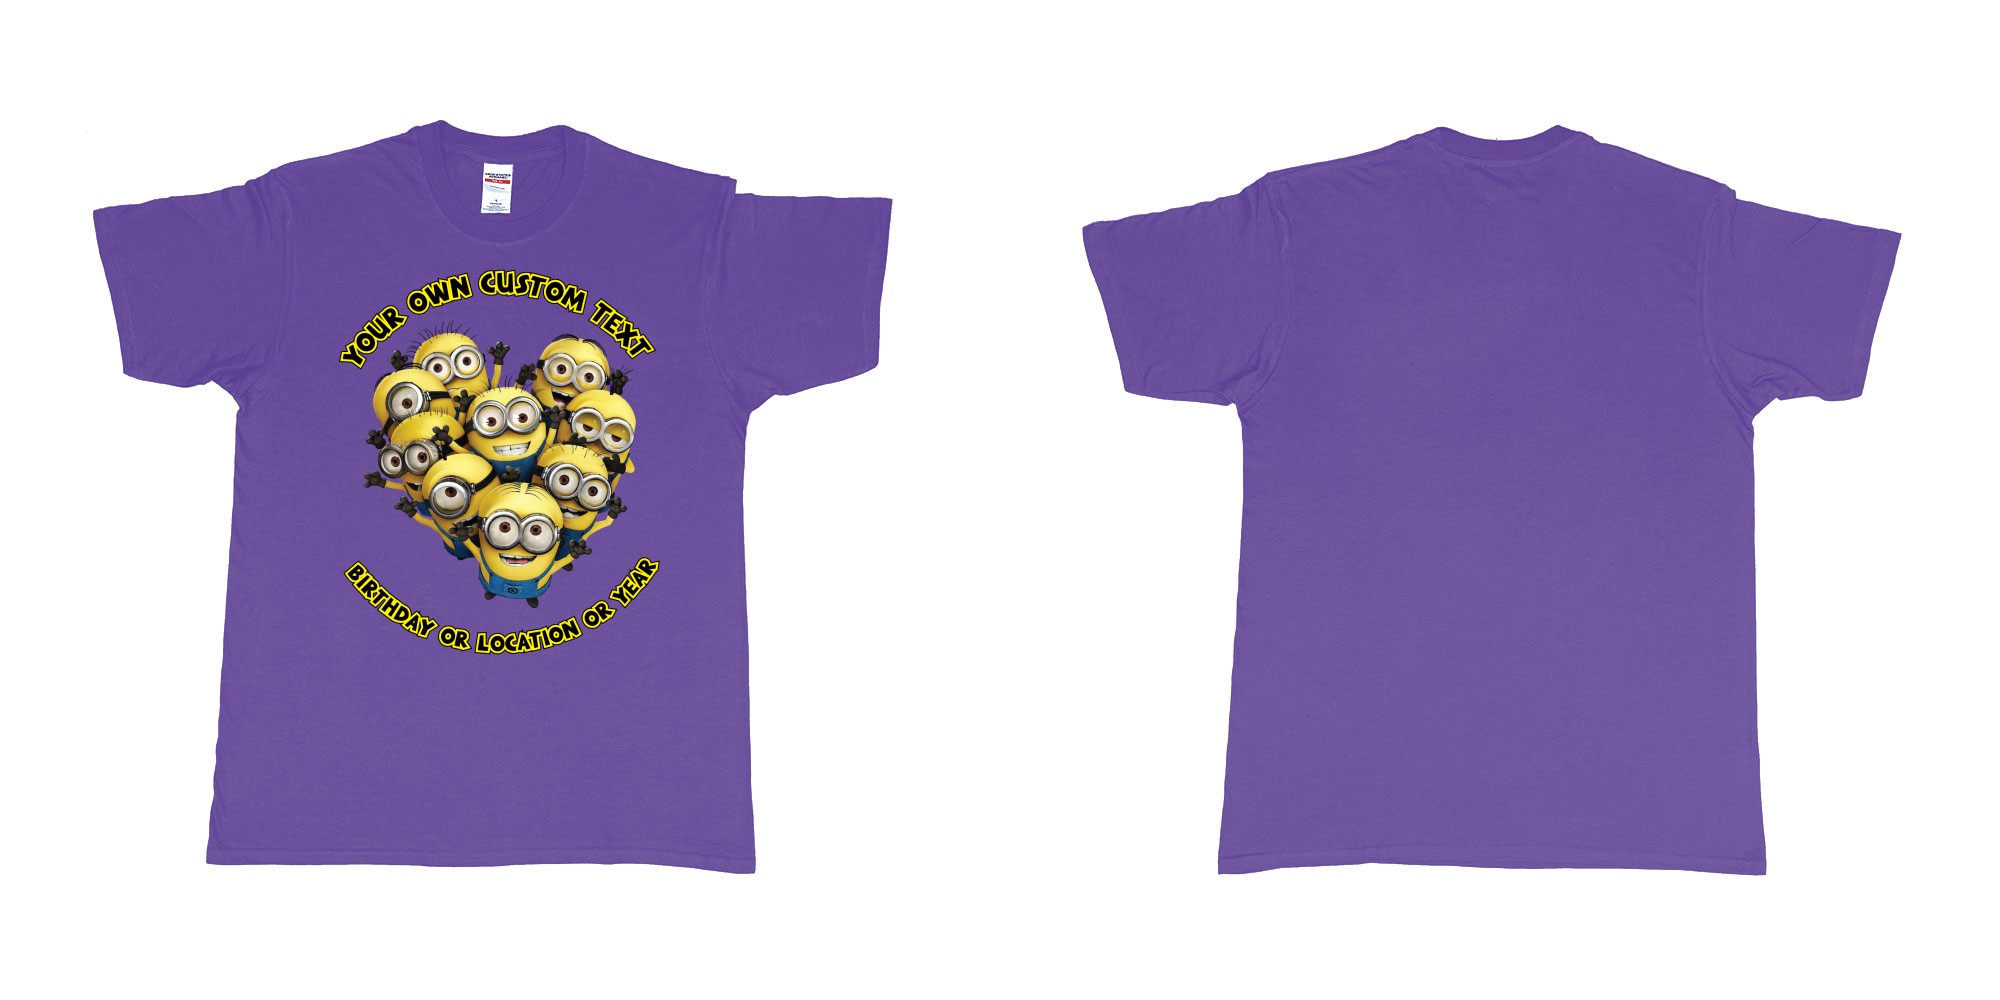 Custom tshirt design minions celebrating you in fabric color purple choice your own text made in Bali by The Pirate Way